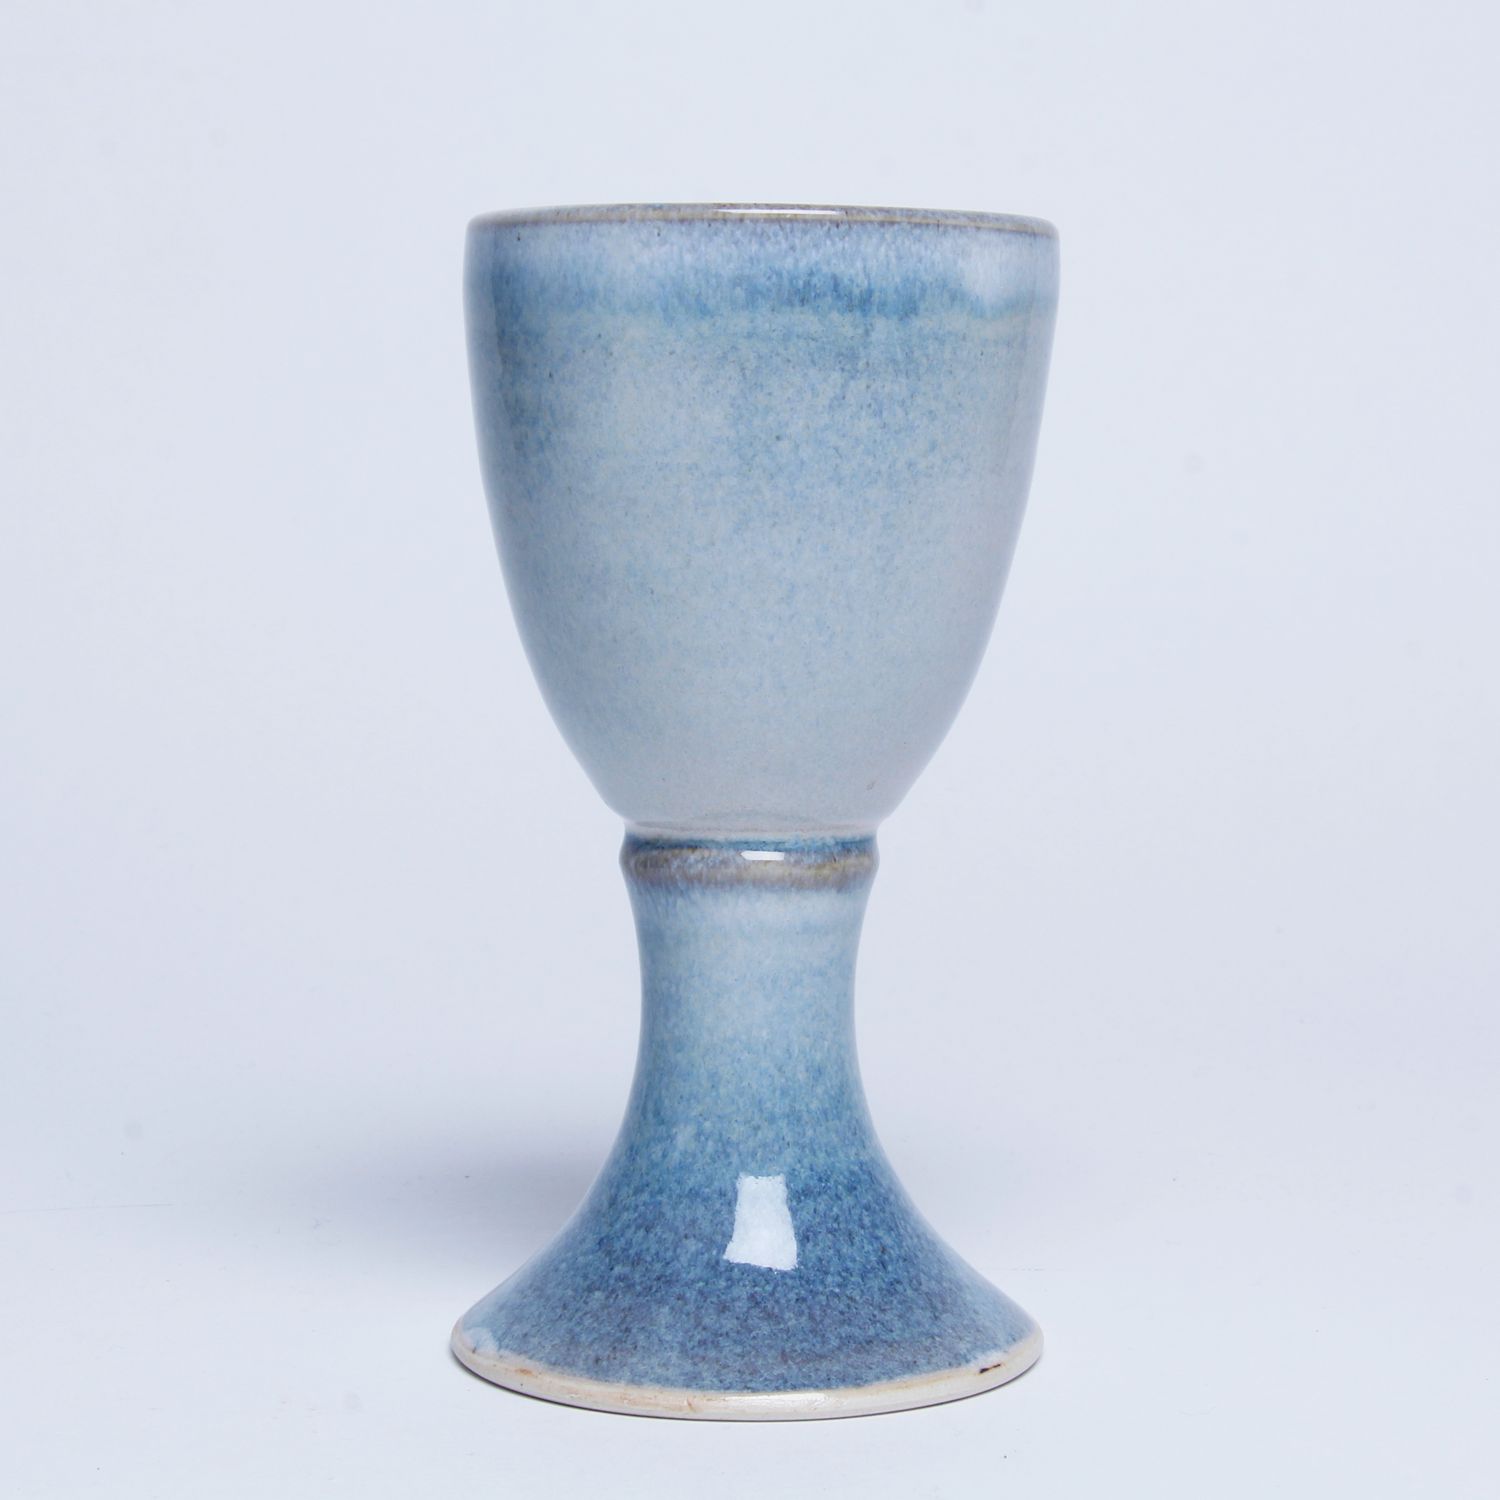 Teresa Dunlop: Goblet (Each sold separately) Product Image 2 of 3